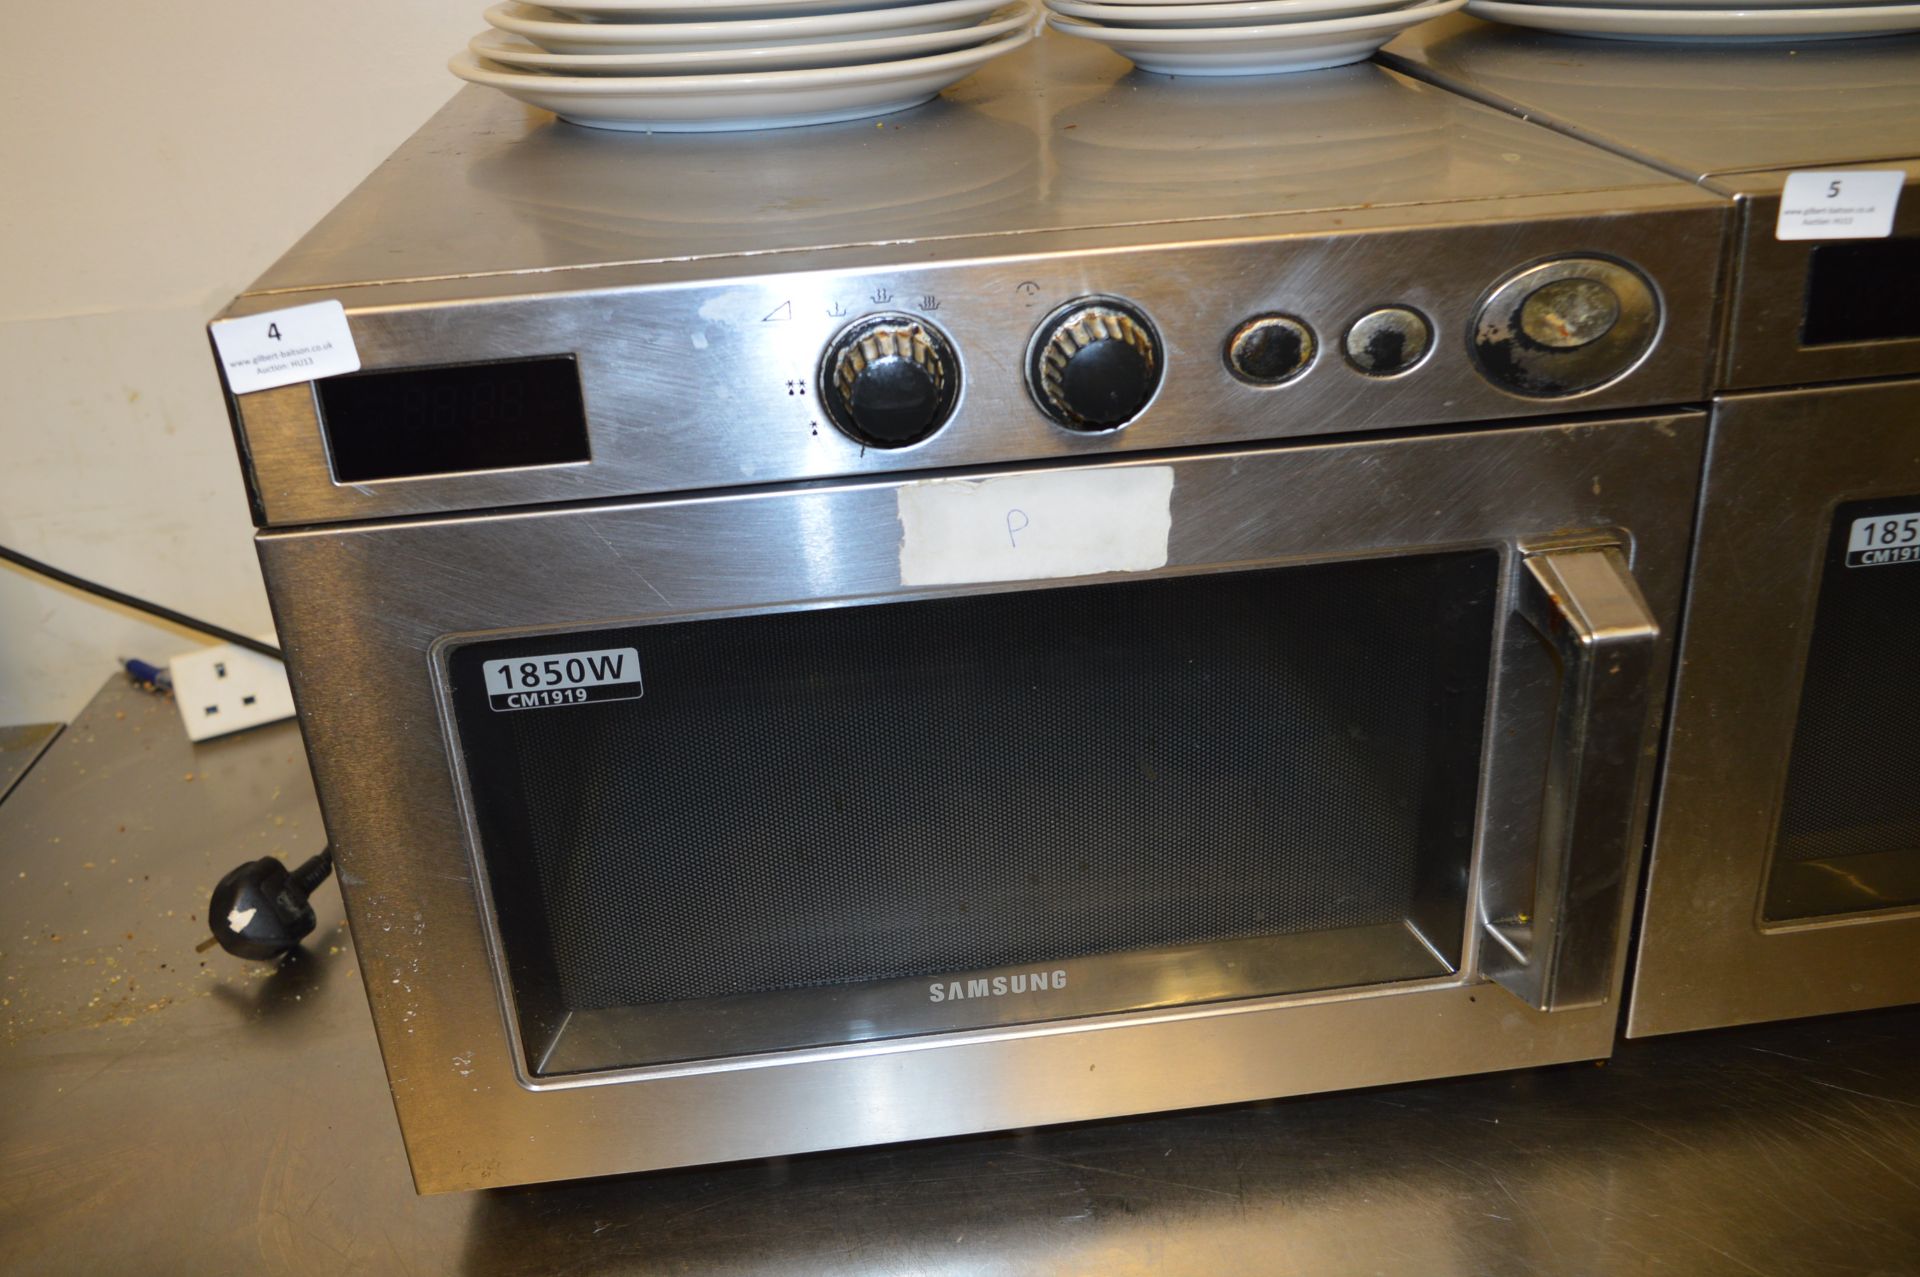 *Samsung 850W Commercial Microwave Oven CM1919